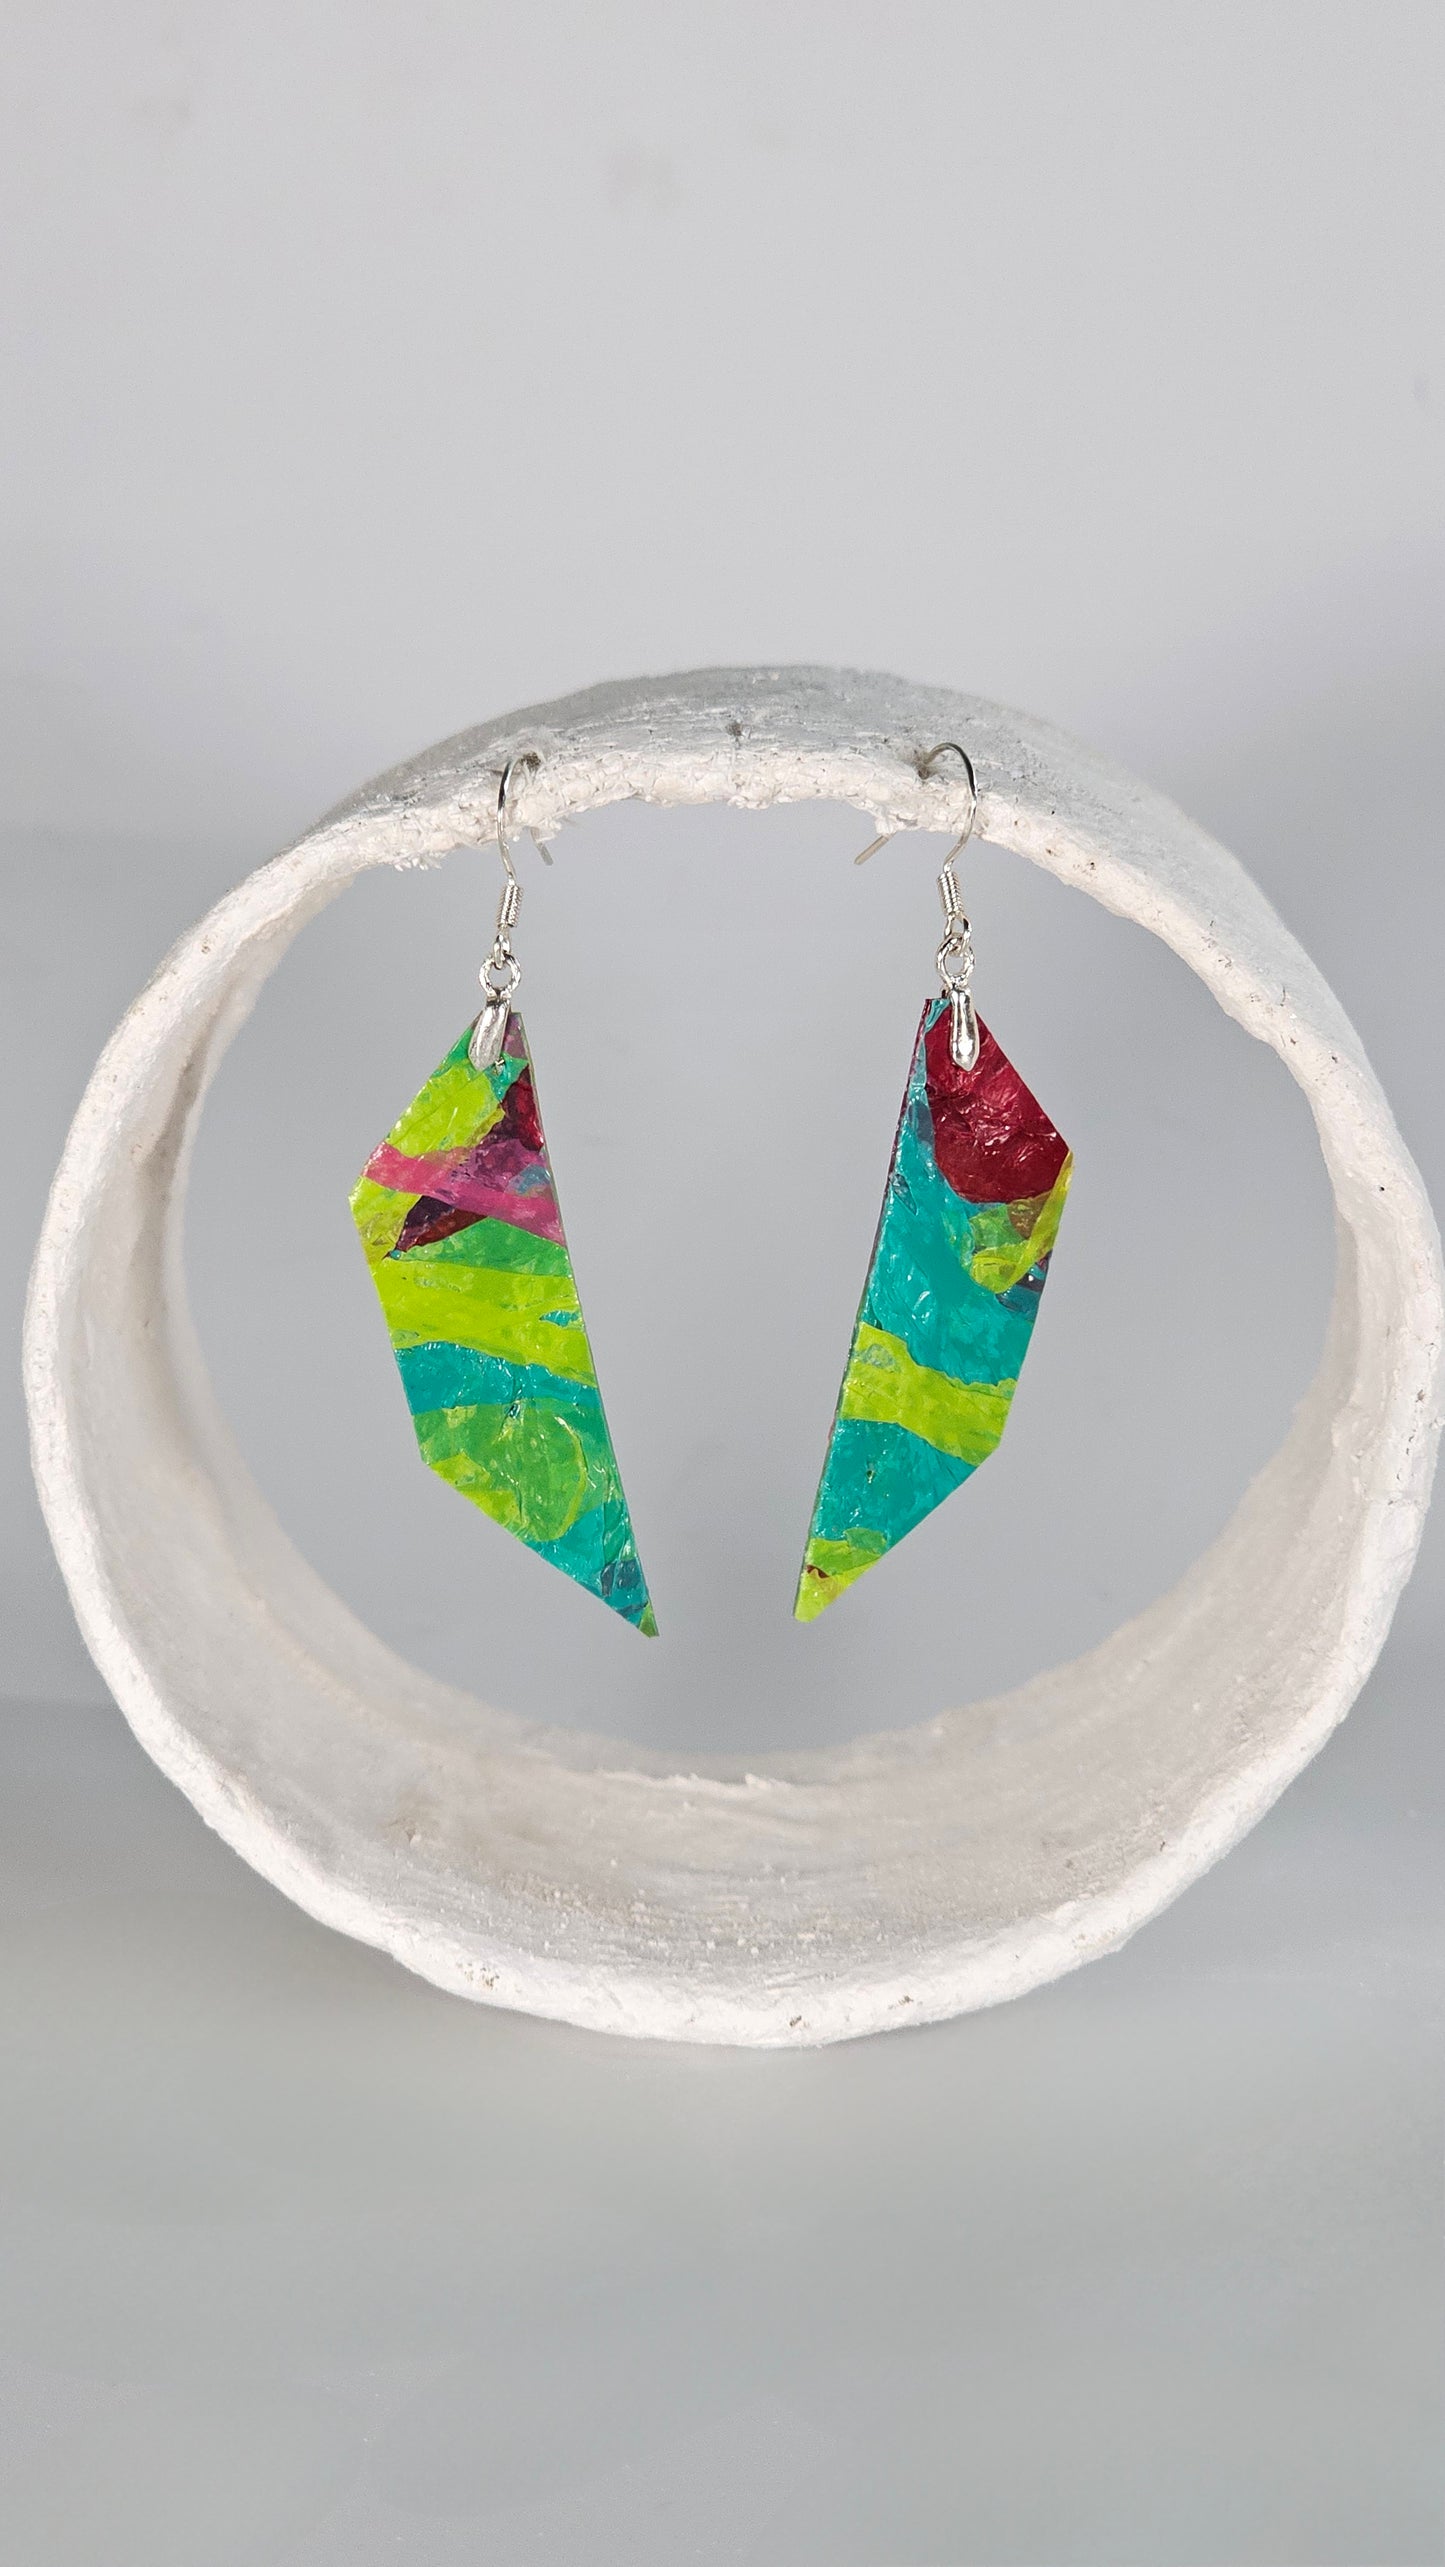 Small red and green angular earrings - PLASTIQUE By Siân